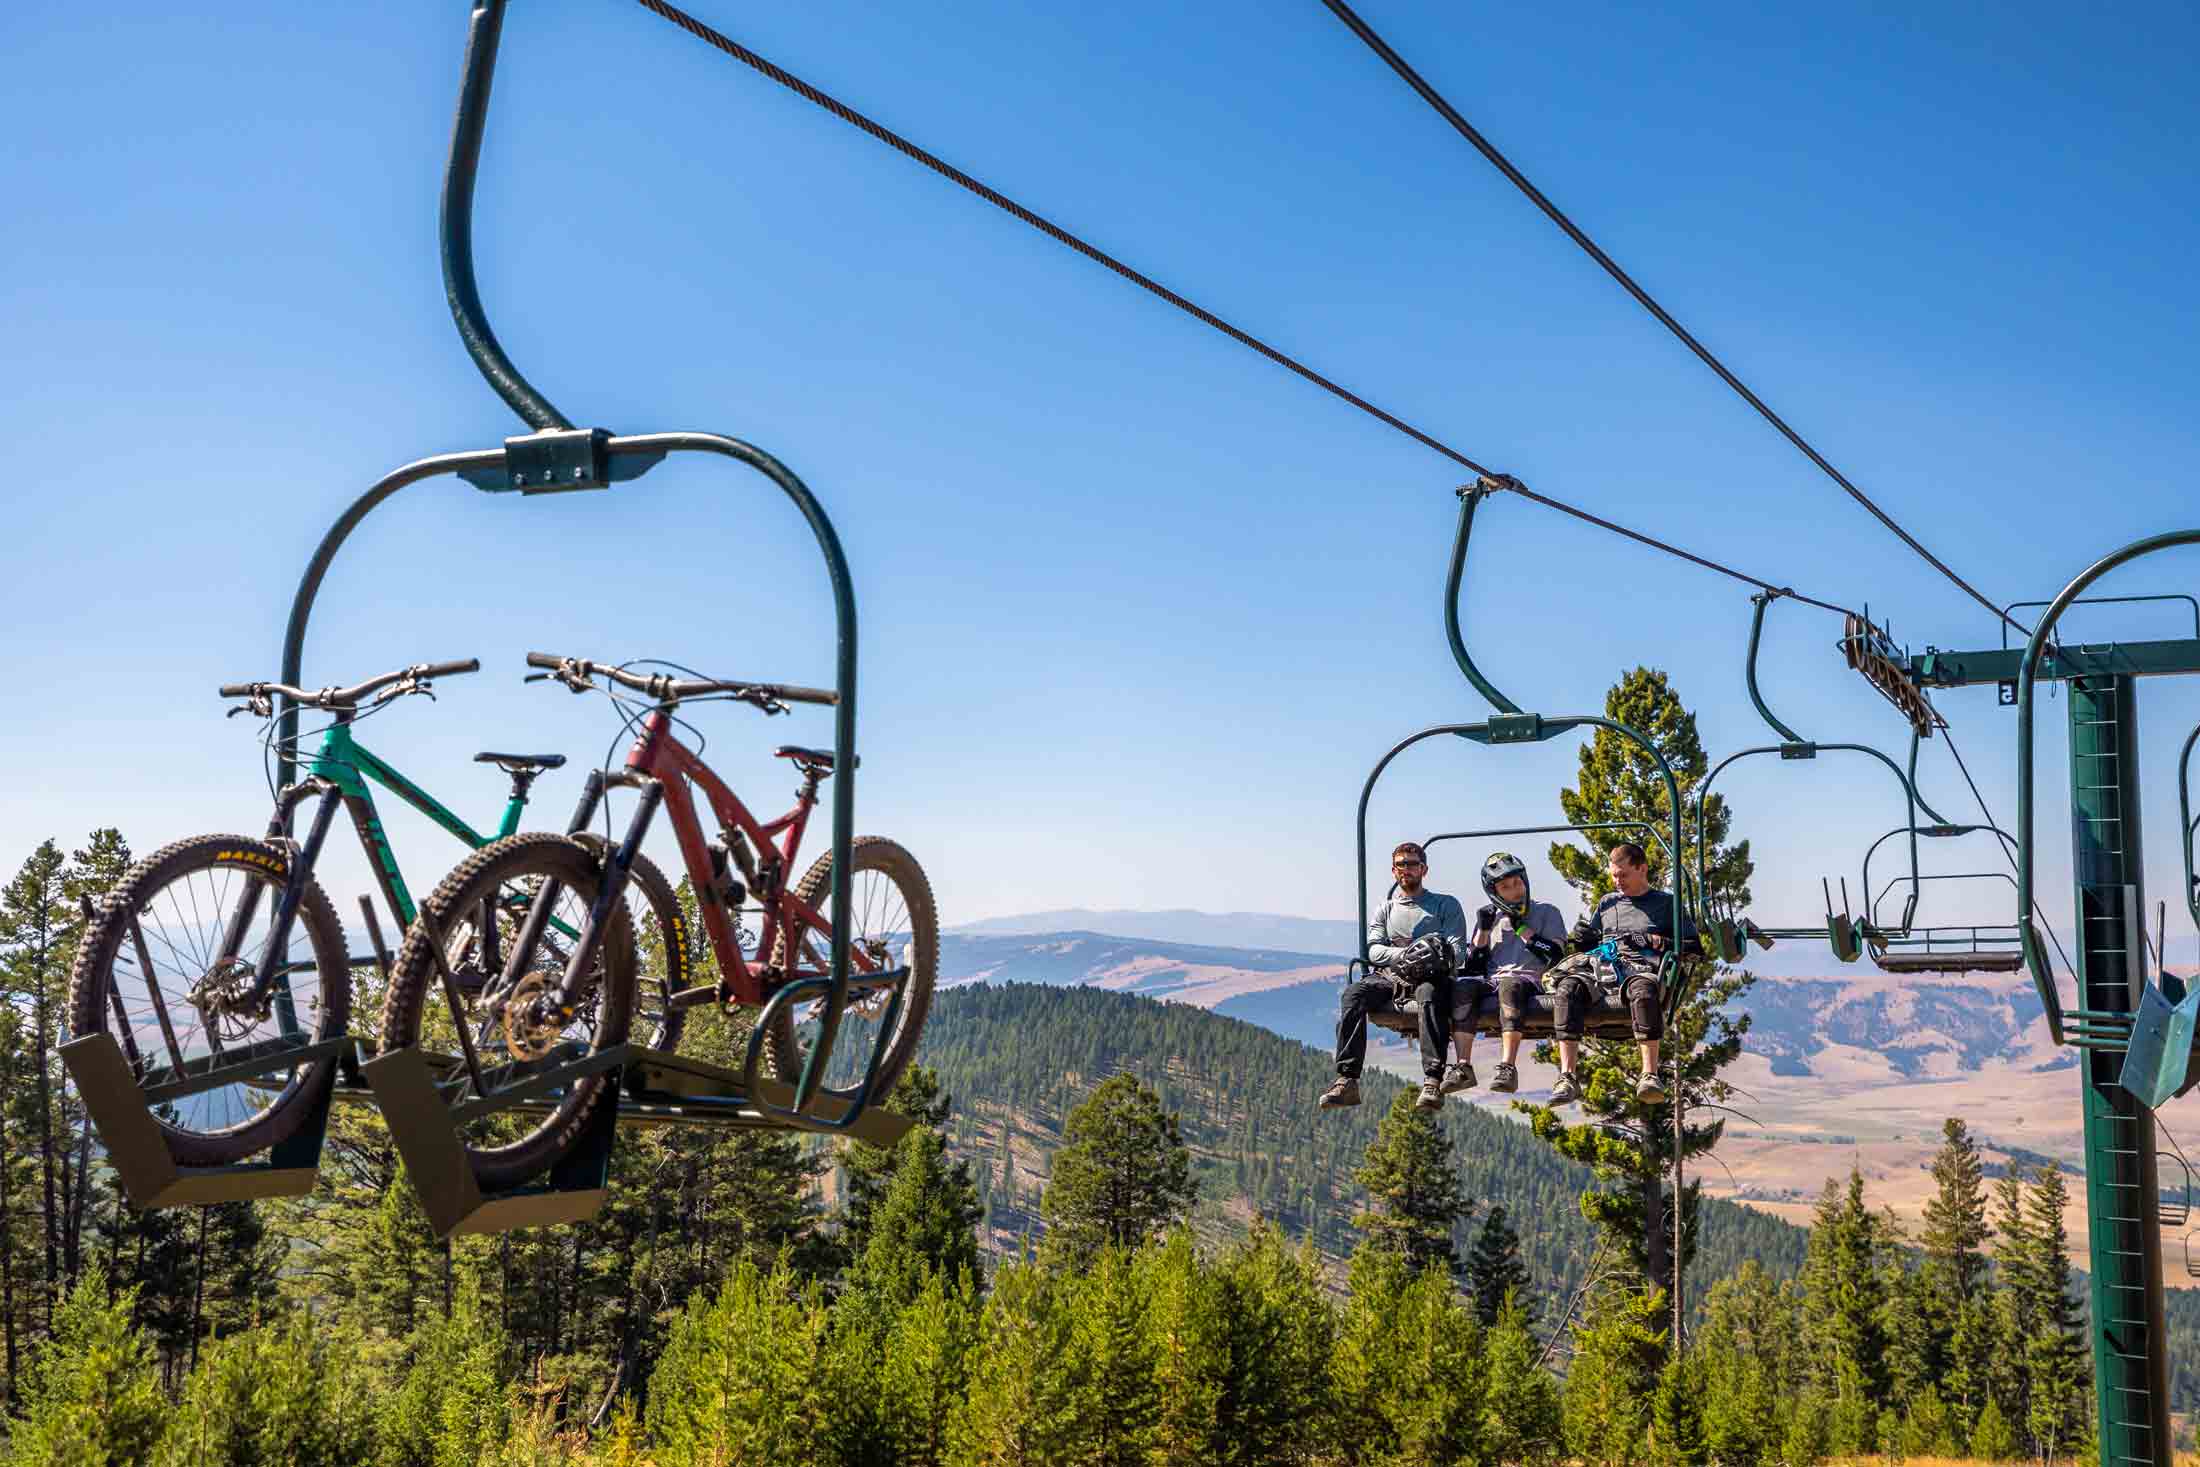 Cyclists on a lift with their mountain bikes at Discovery Bike Park in Philipsburg, Montana.